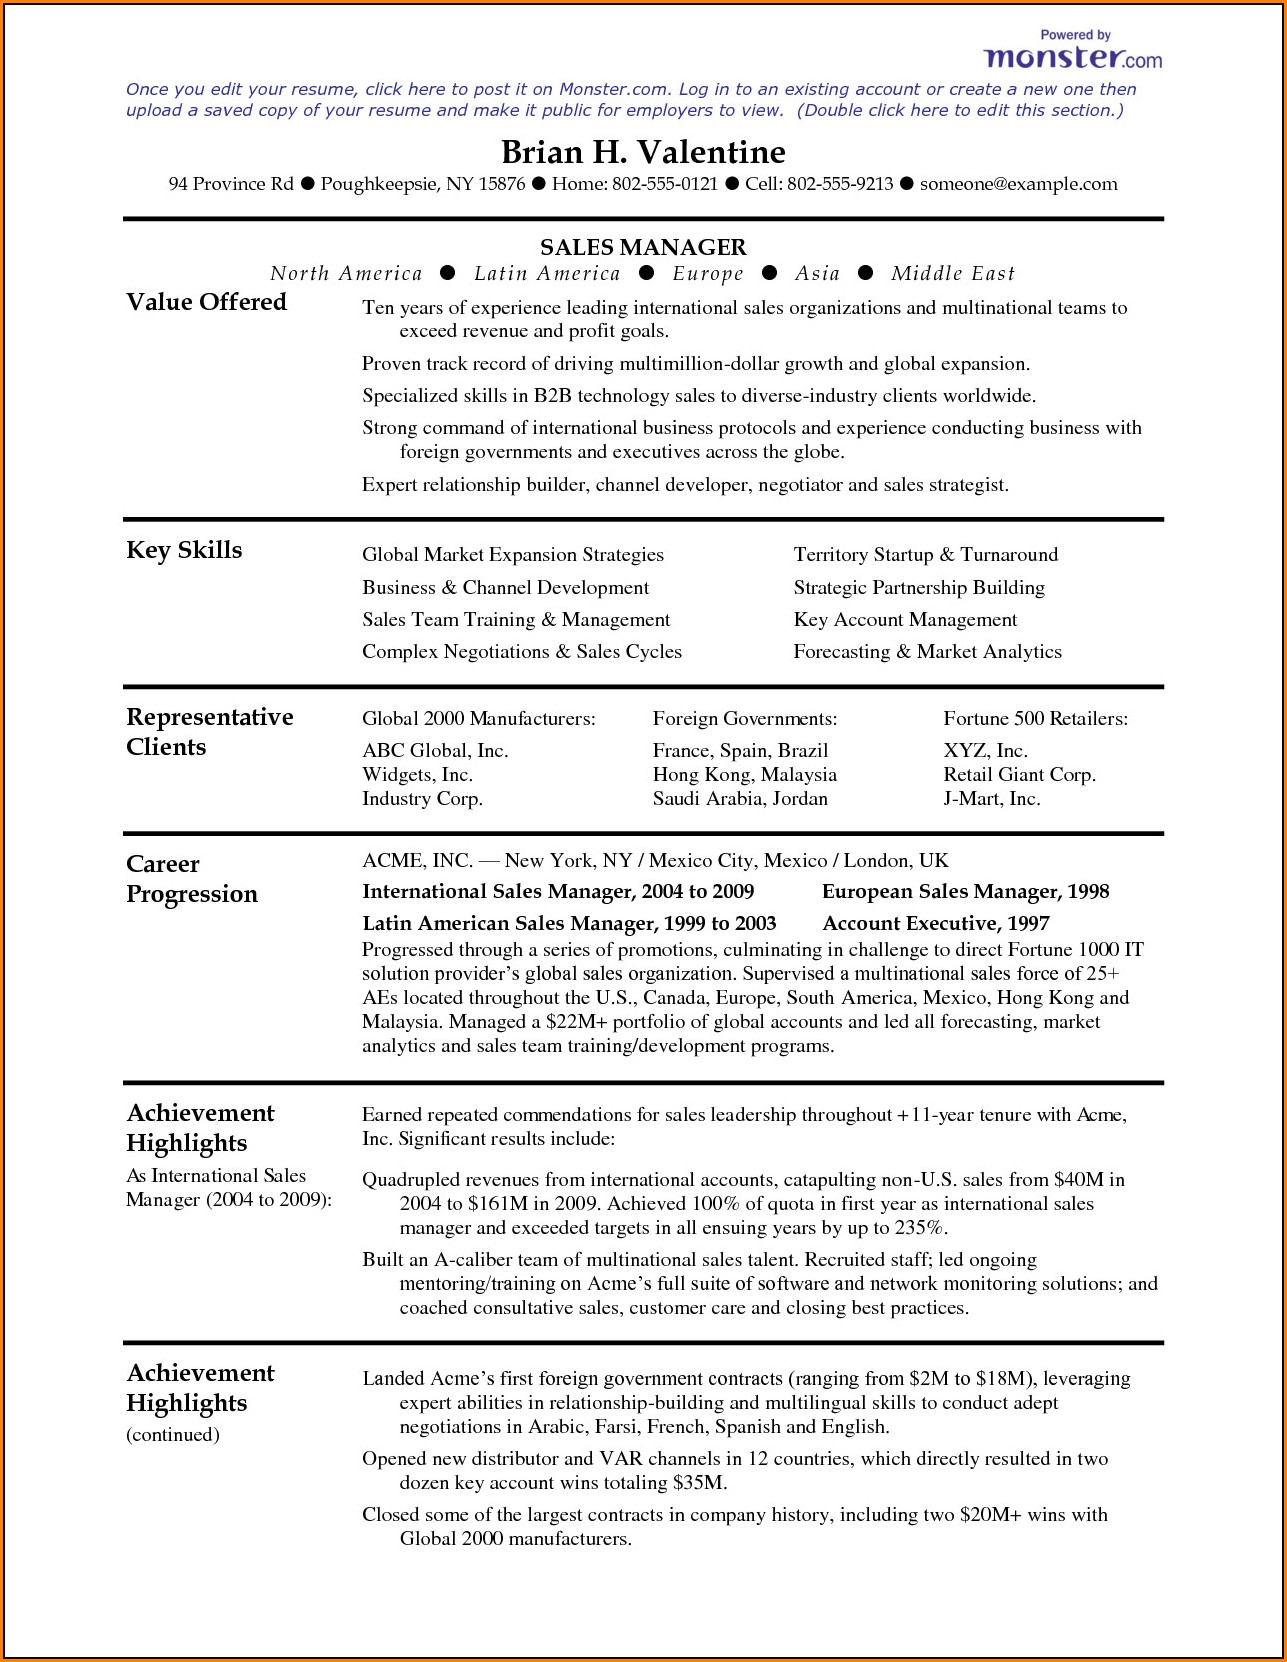 Monster resume writing services reviews